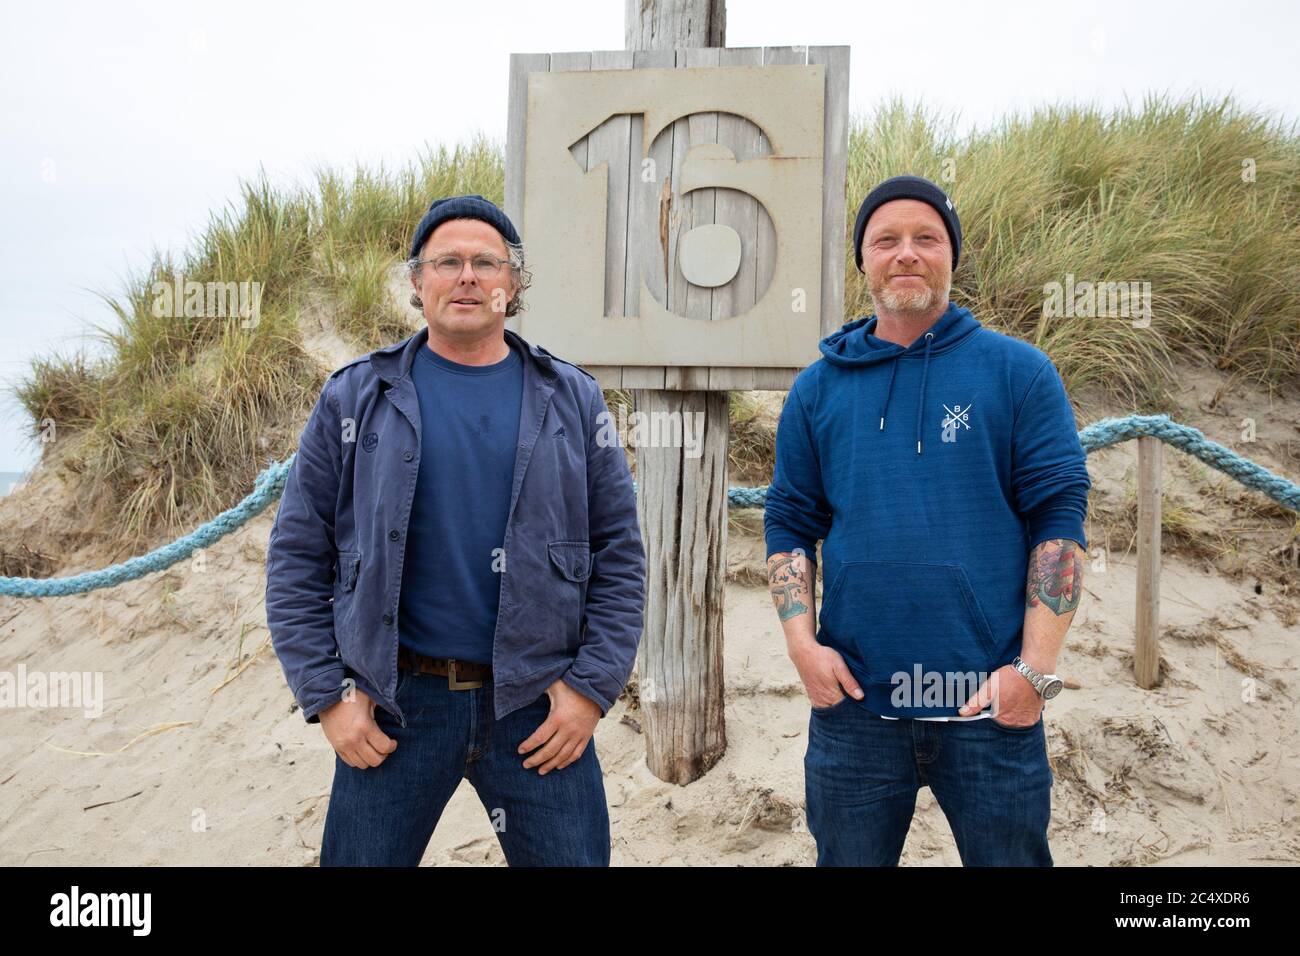 11 June 2020, Schleswig-Holstein, Kampen (Sylt): The cousins Sven Behrens  and Tim Behrens (r), manager of the bistro "Buhne 16", are standing in  front of a wooden sign at the entrance to